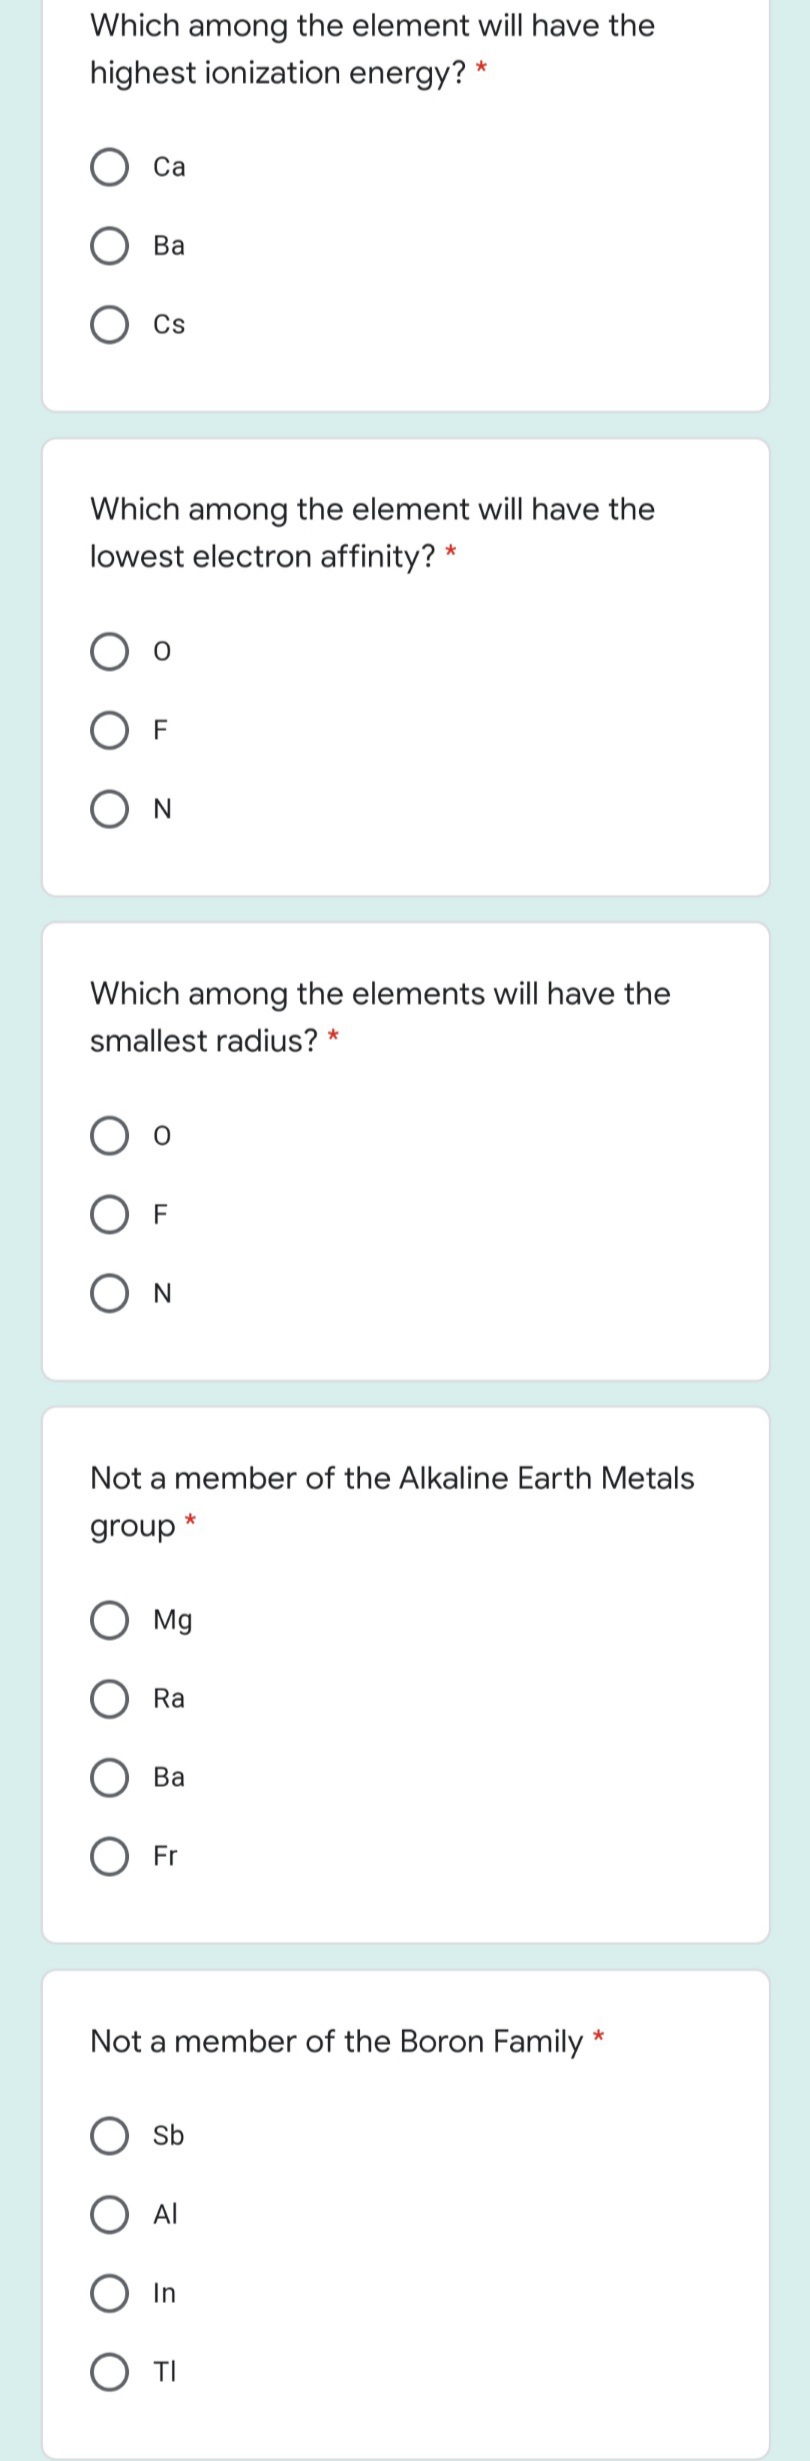 Which among the element will have the
highest ionization energy? *
Са
Ba
Cs
Which among the element will have the
lowest electron affinity? *
O F
O N
Which among the elements will have the
smallest radius? *
F
Not a member of the Alkaline Earth Metals
group *
Mg
Ra
Ва
Fr
Not a member of the Boron Family
*
O Sb
TI
